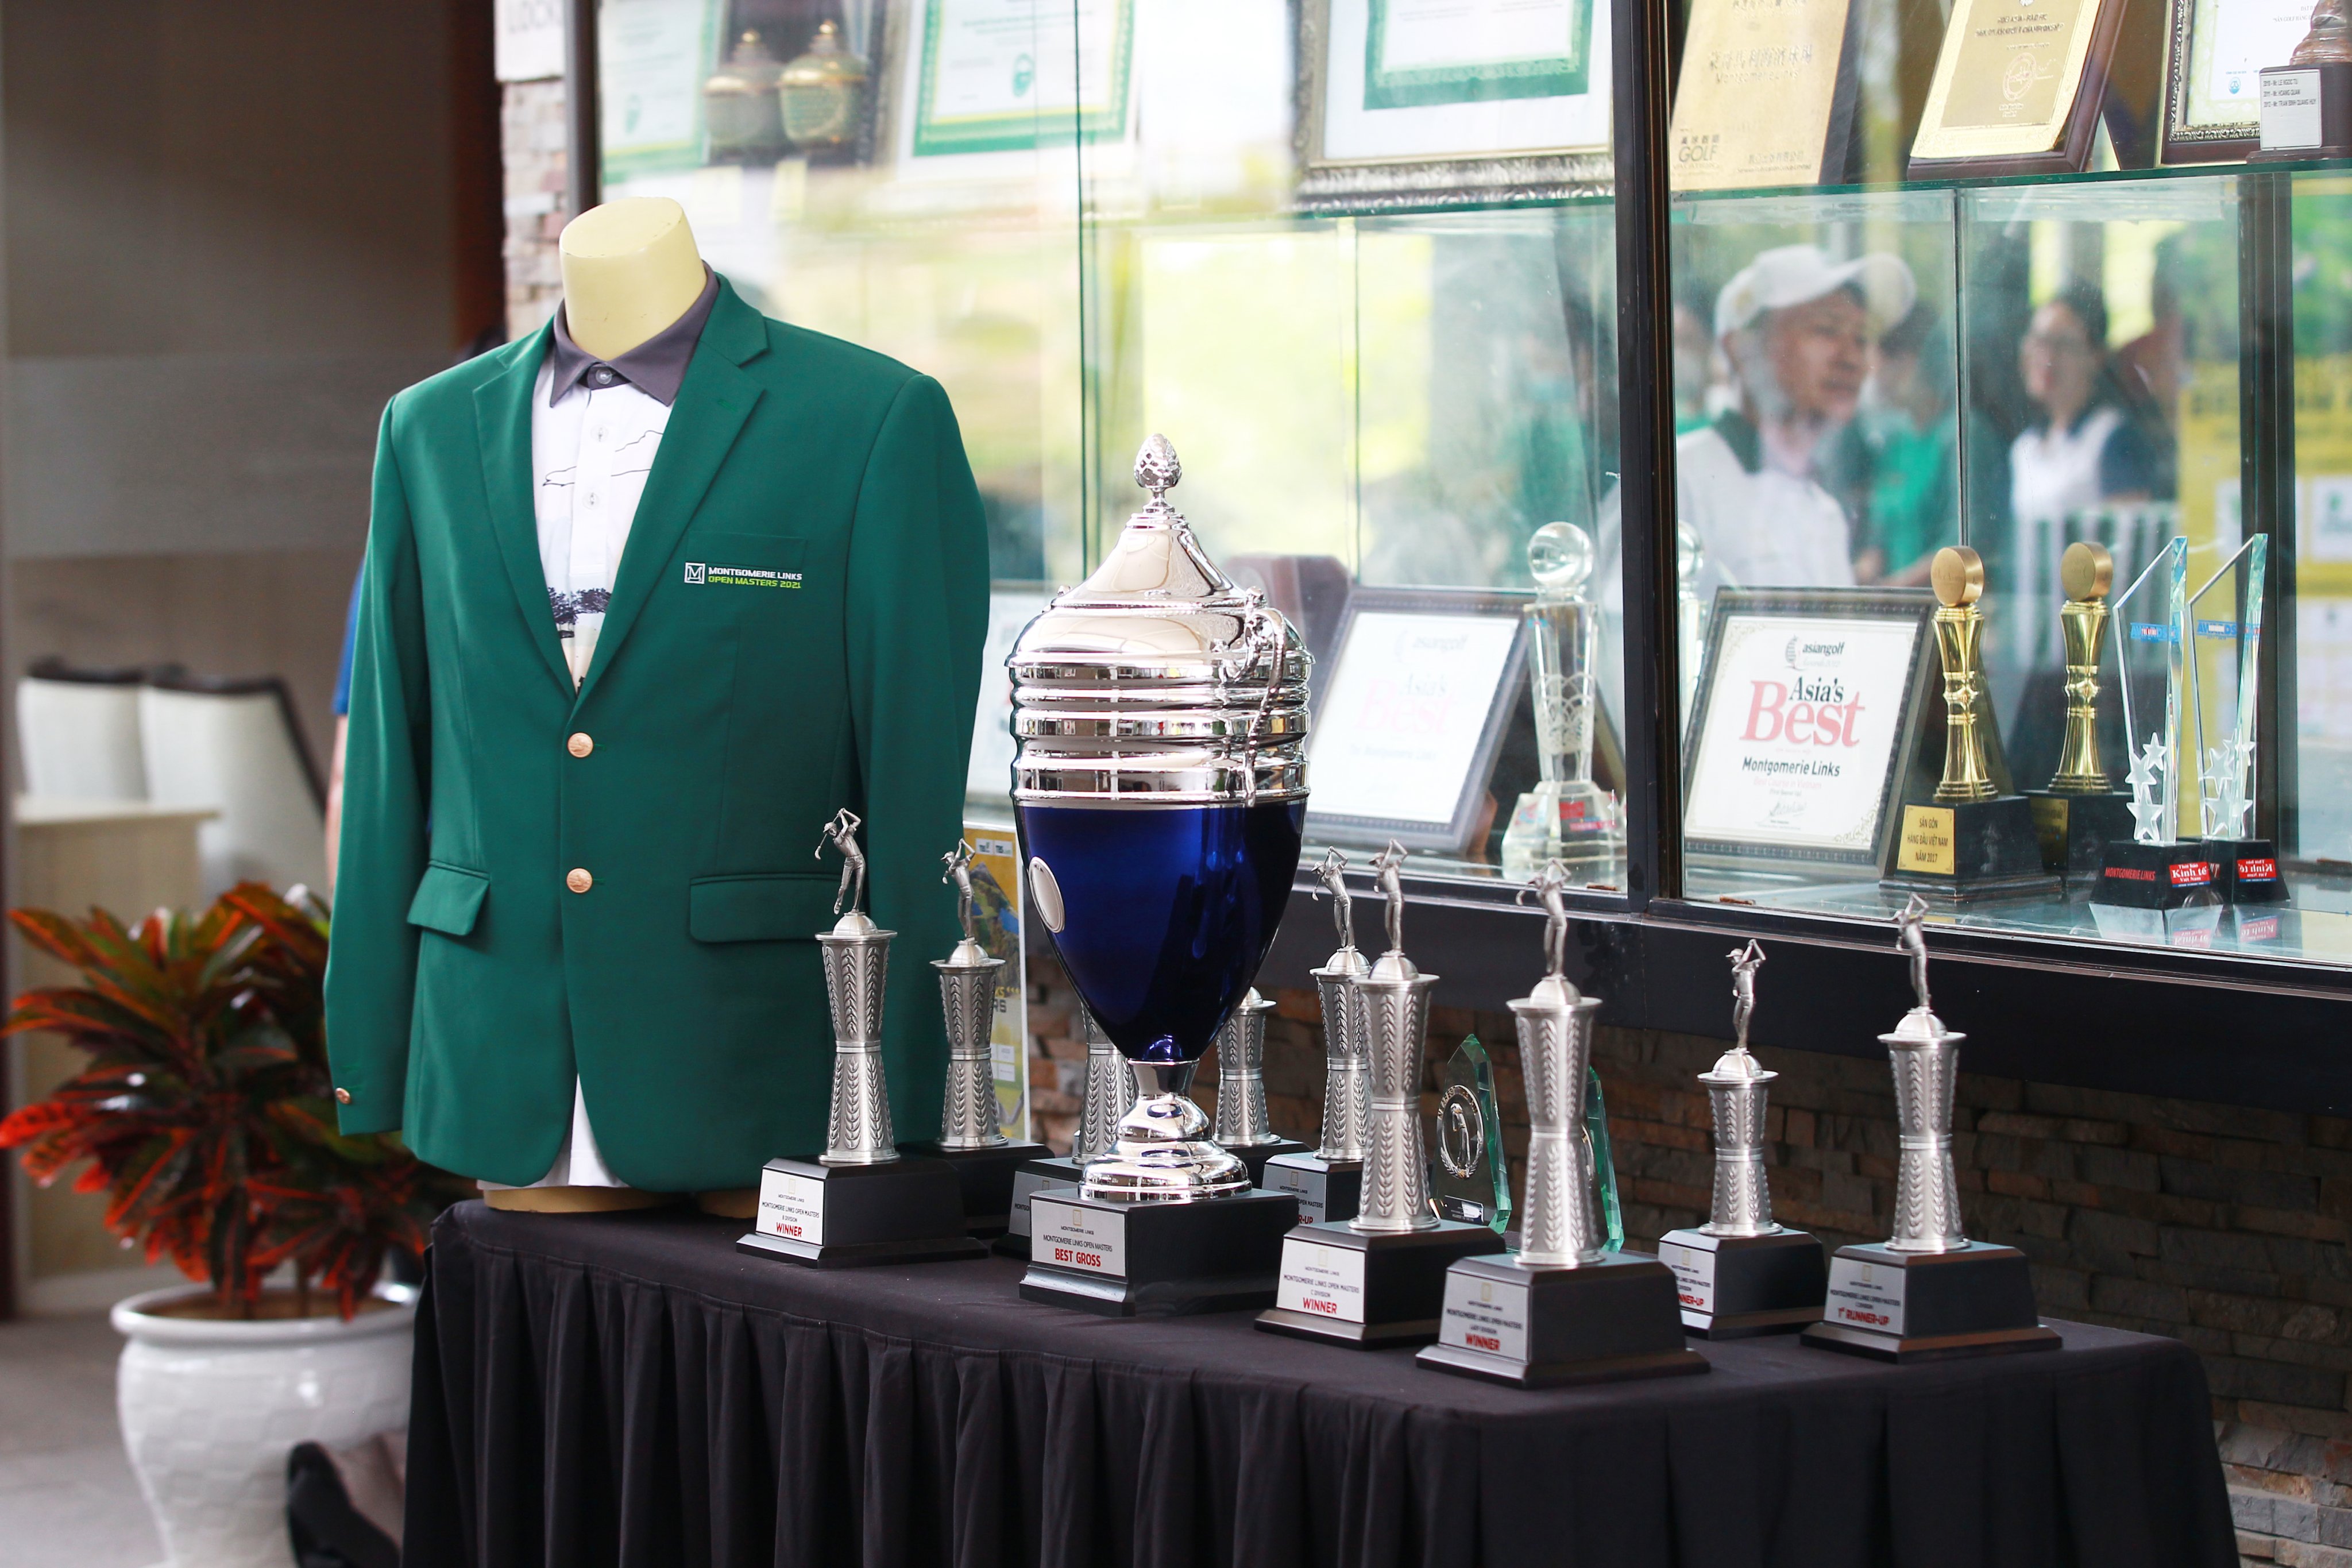 THE ICONIC MASTERS' GREEN JACKET - THE ULTIMATE SYMBOL OF GOLFING SUCCESS